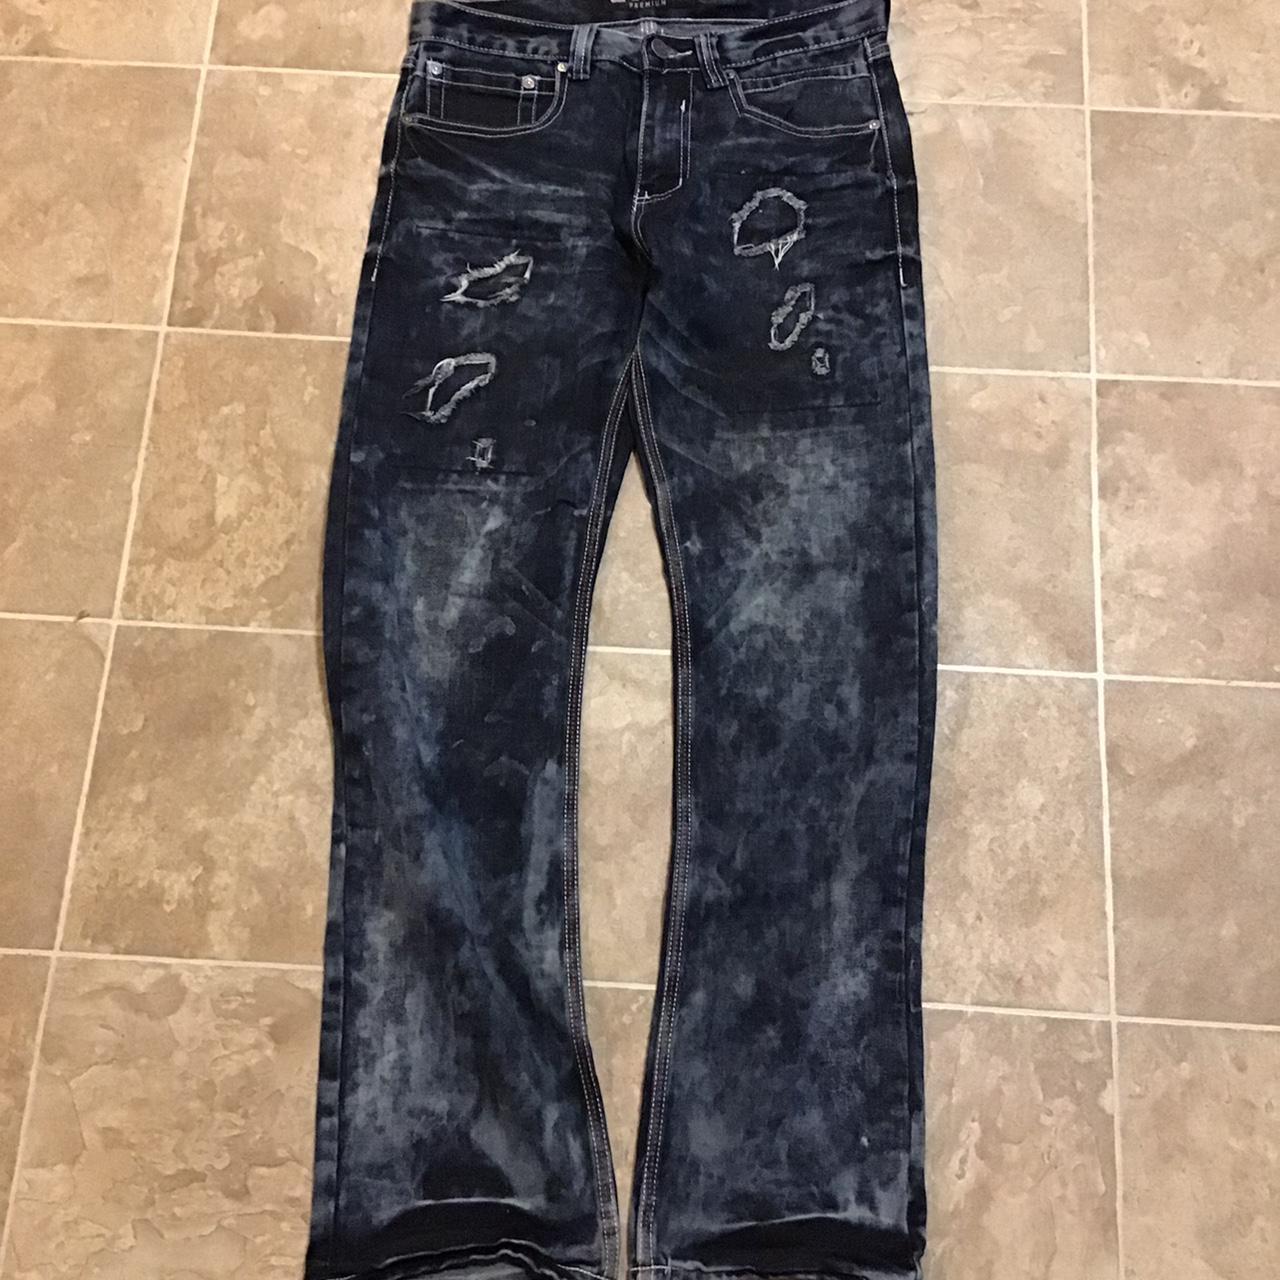 All Black Men's Black and Silver Jeans (2)